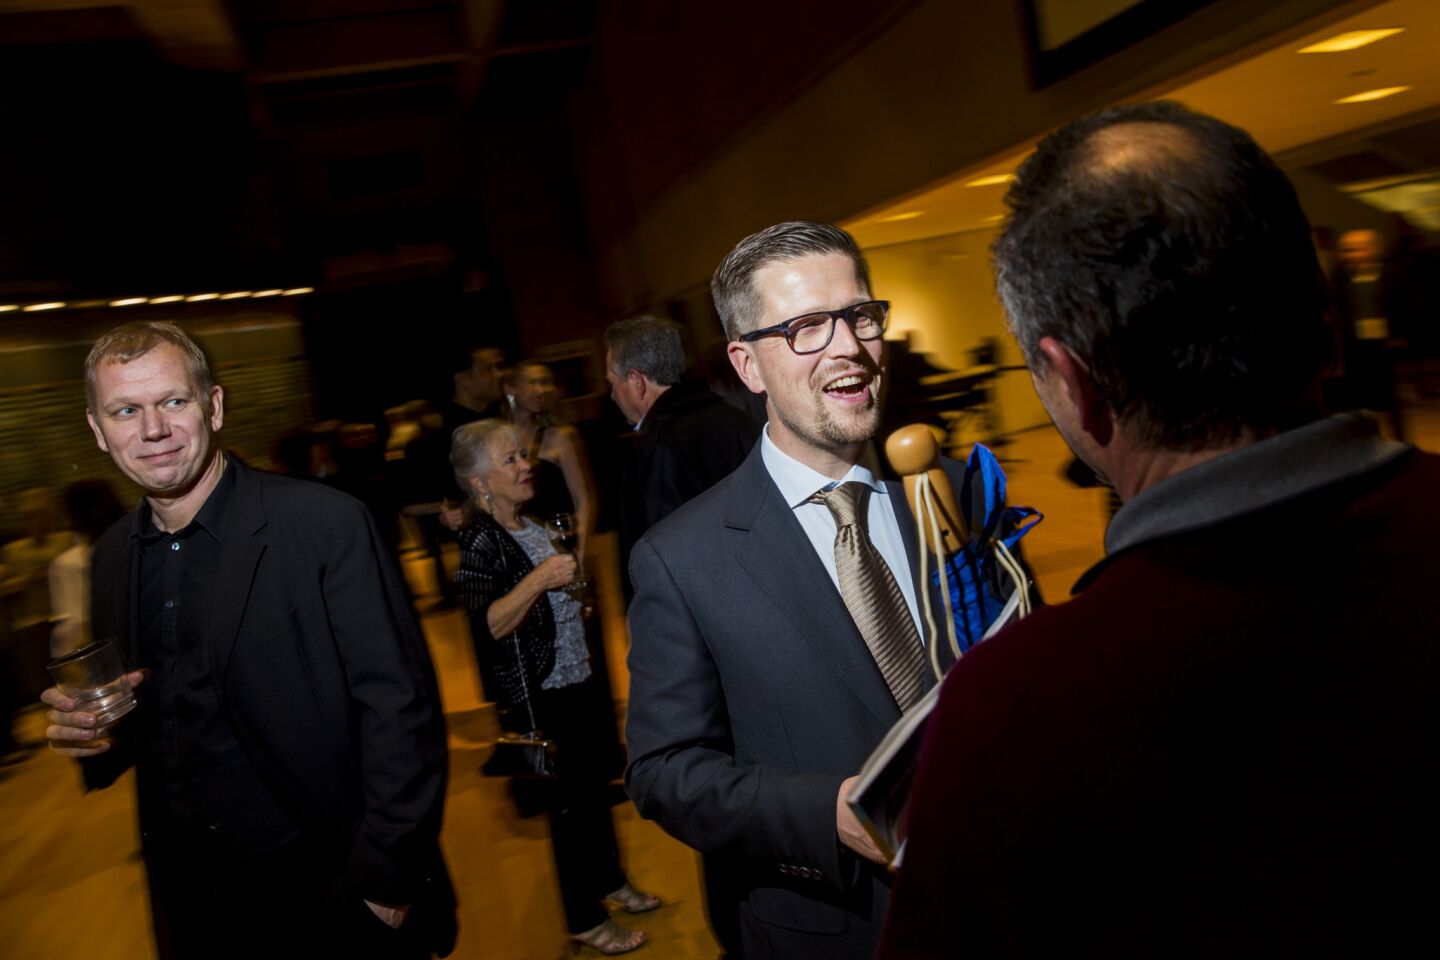 Producer Kai Nordberg, left, and director Klaus Härö greet movie fans at a party after the premiere of Härö's film "The Fencer."